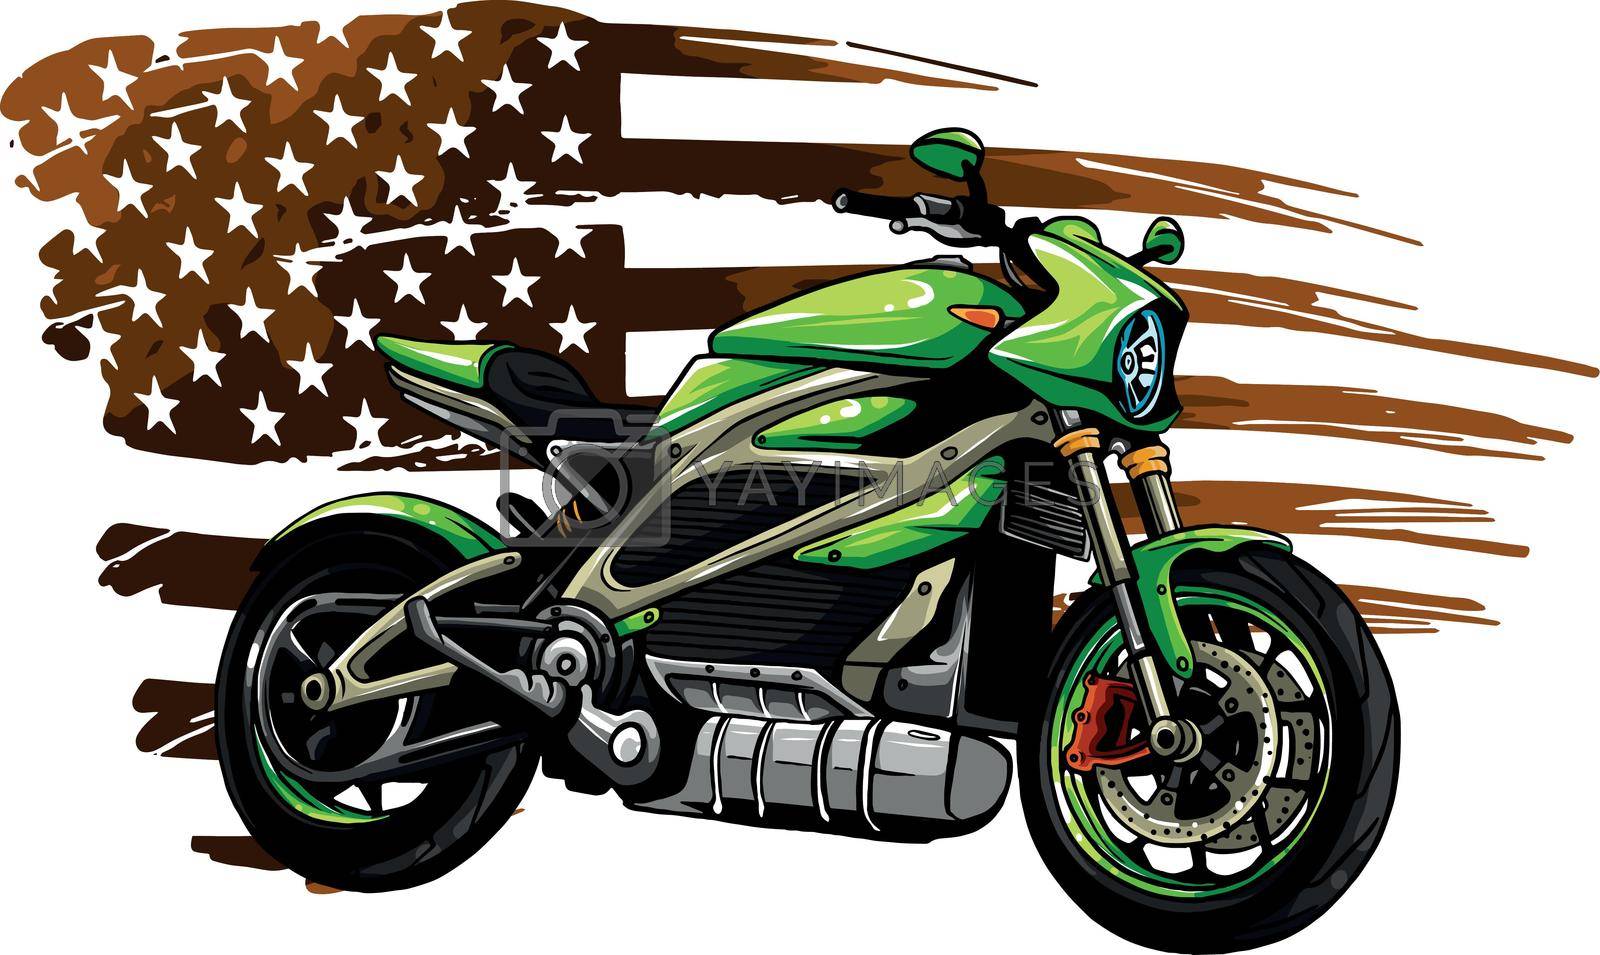 Royalty free image of american flag with bike vector illustration design by dean